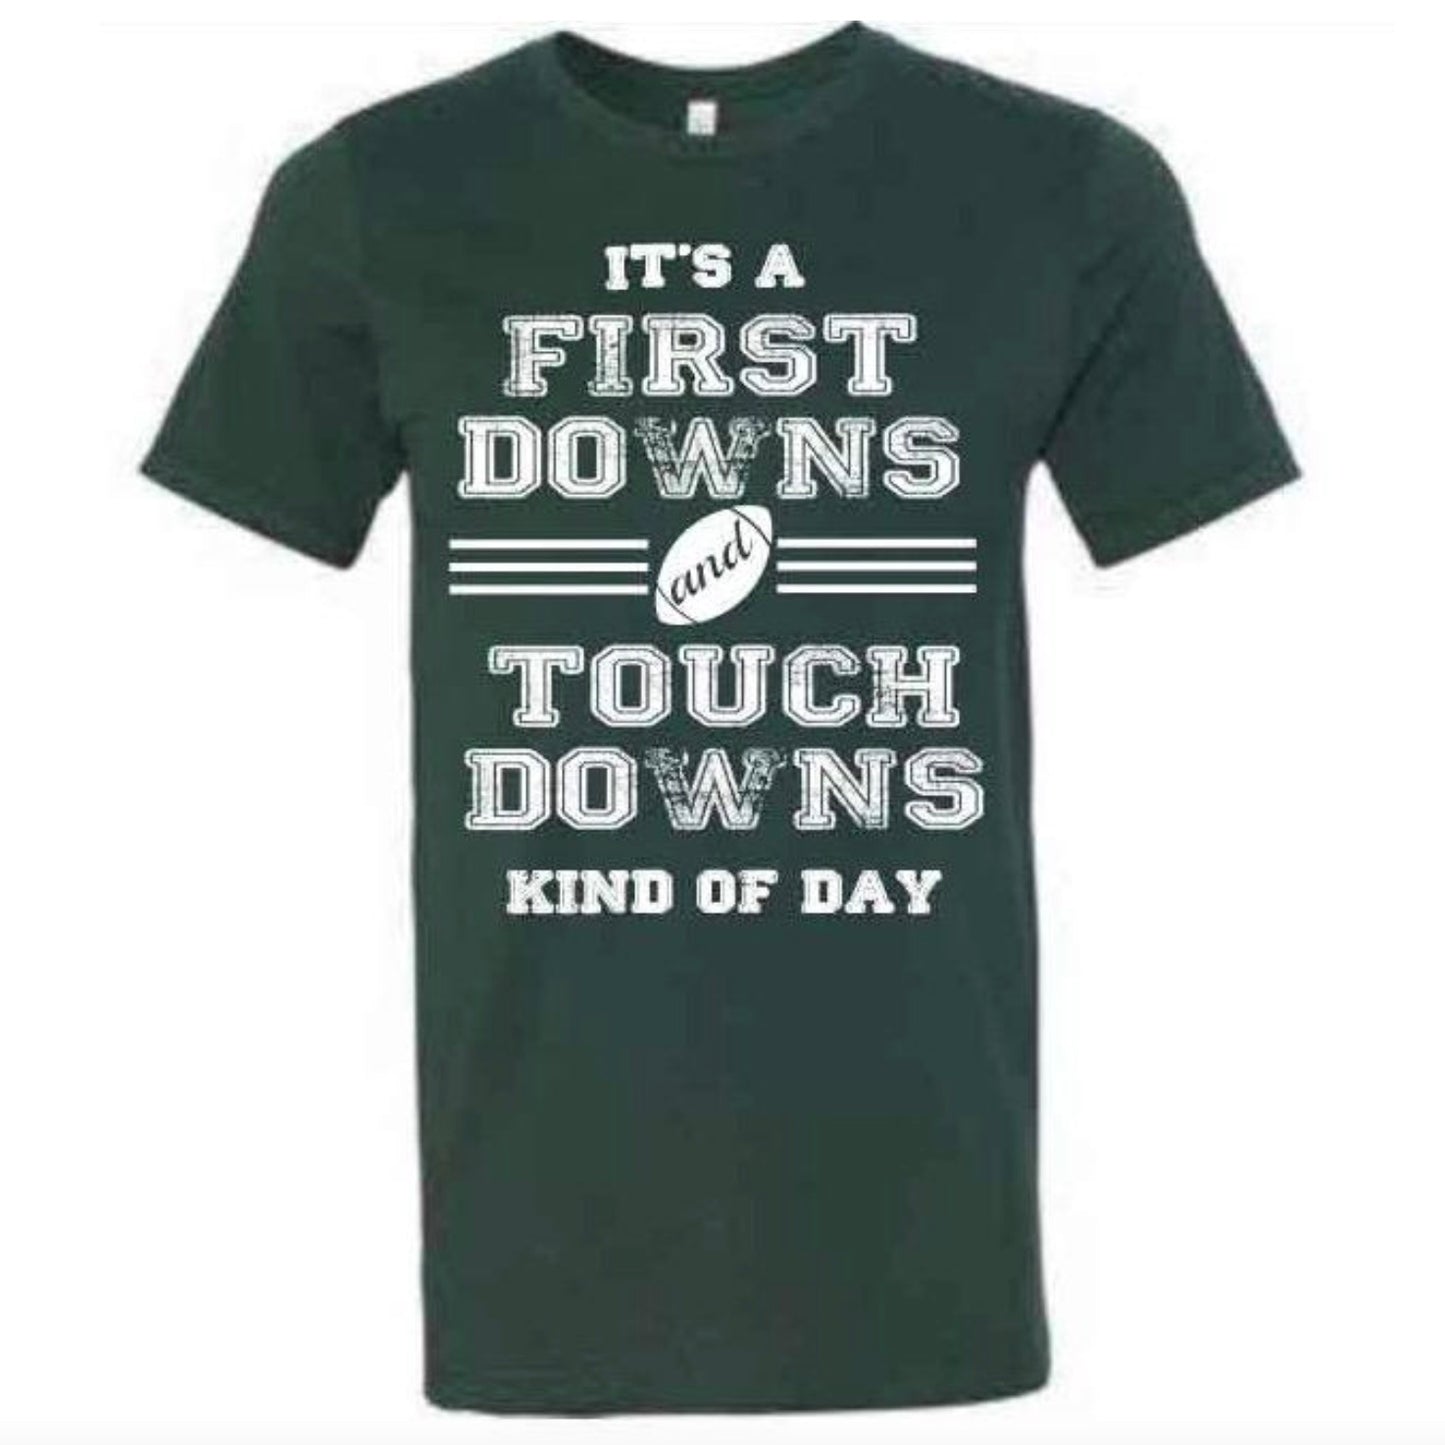 First Downs and Touchdowns Tee - J-Hawk Green [will ship separately]